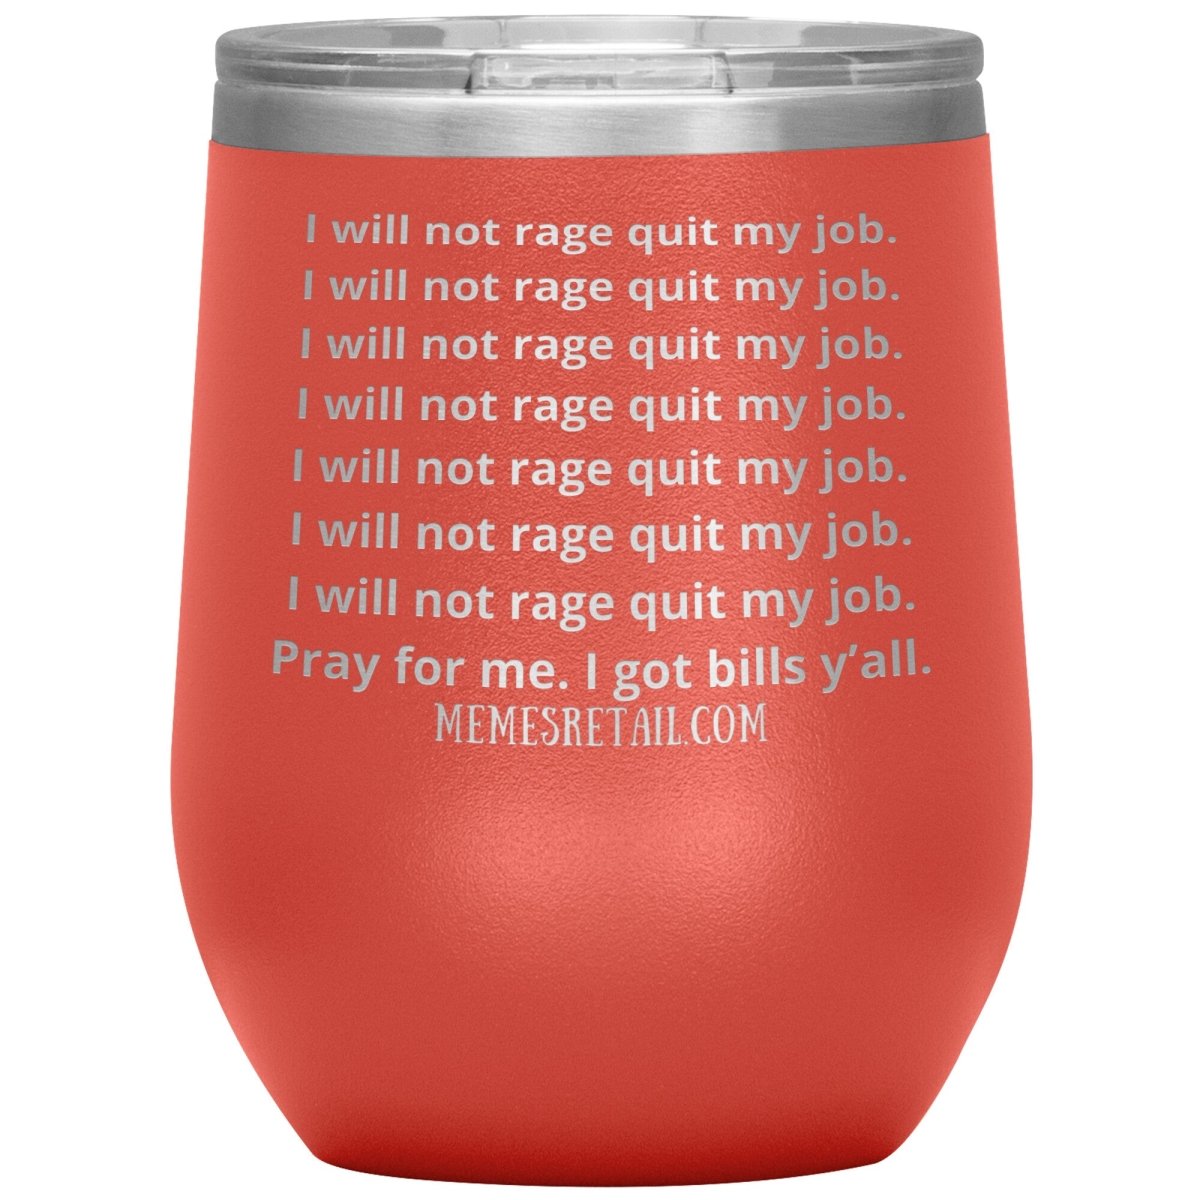 I will not rage quit my job Tumblers, 12oz Wine Insulated Tumbler / Coral - MemesRetail.com